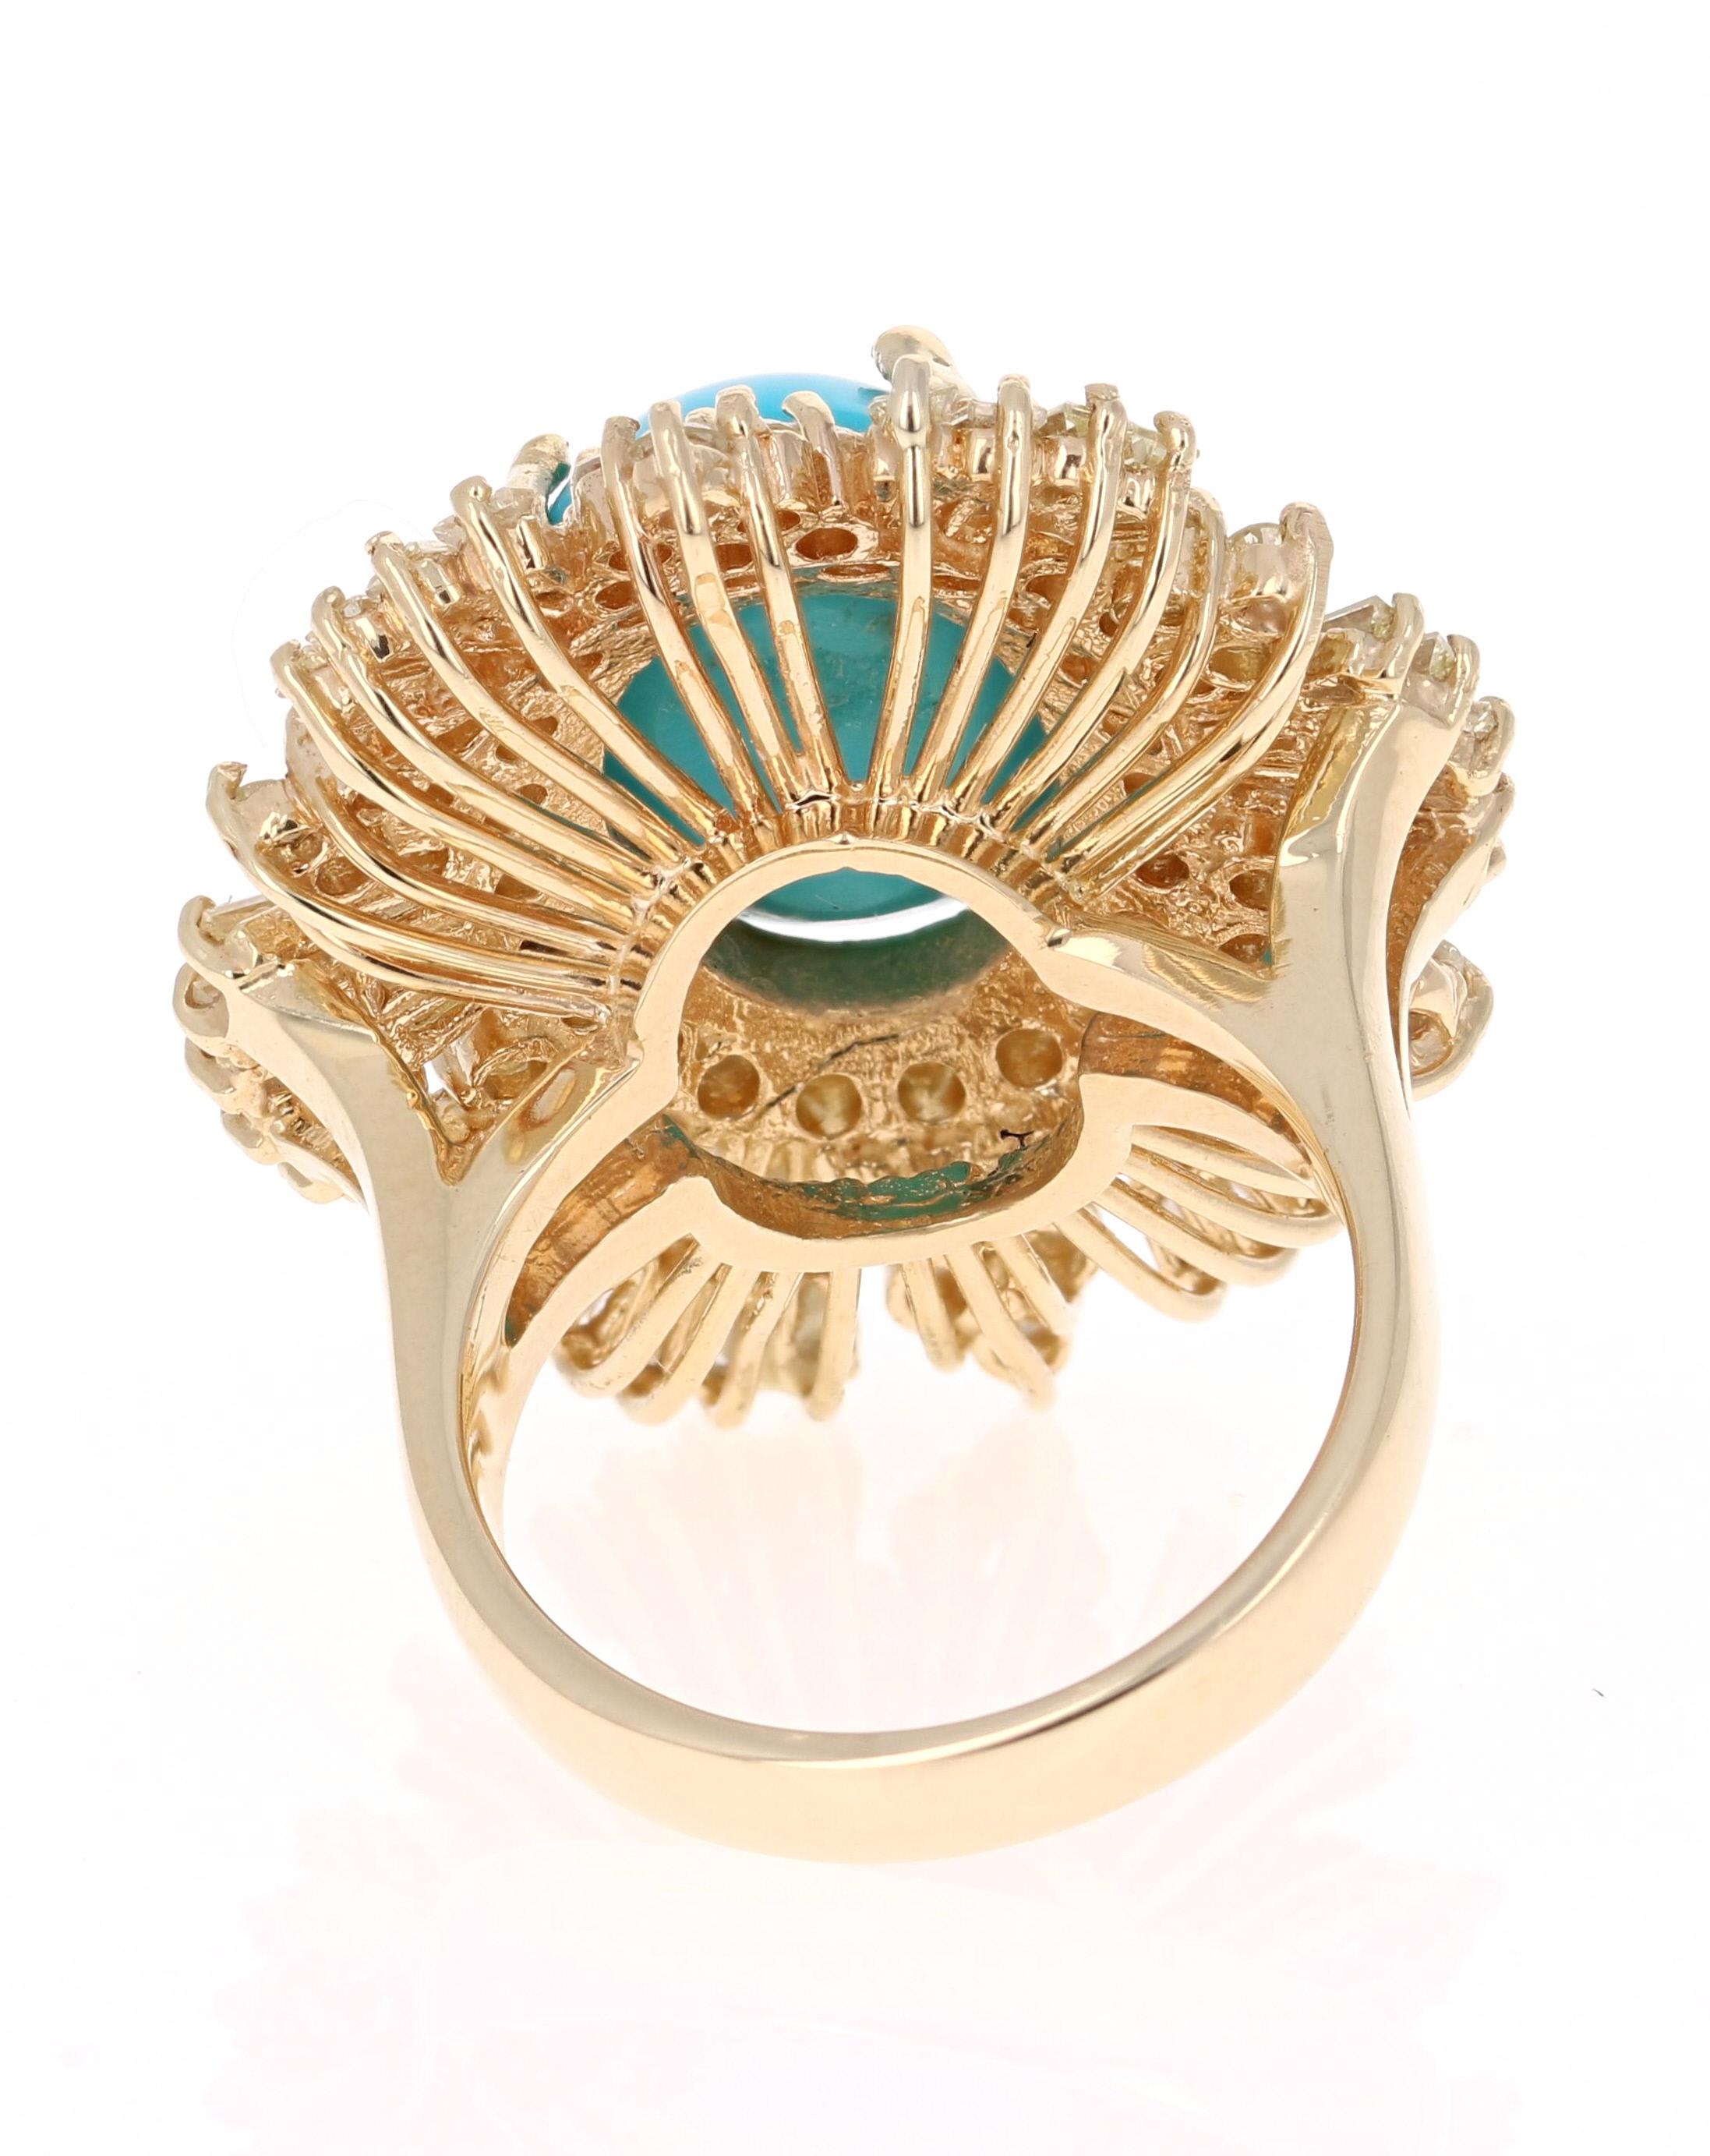 Oval Cut 10.49 Carat Turquoise Diamond 14 Karat Yellow Gold Cocktail Ring For Sale